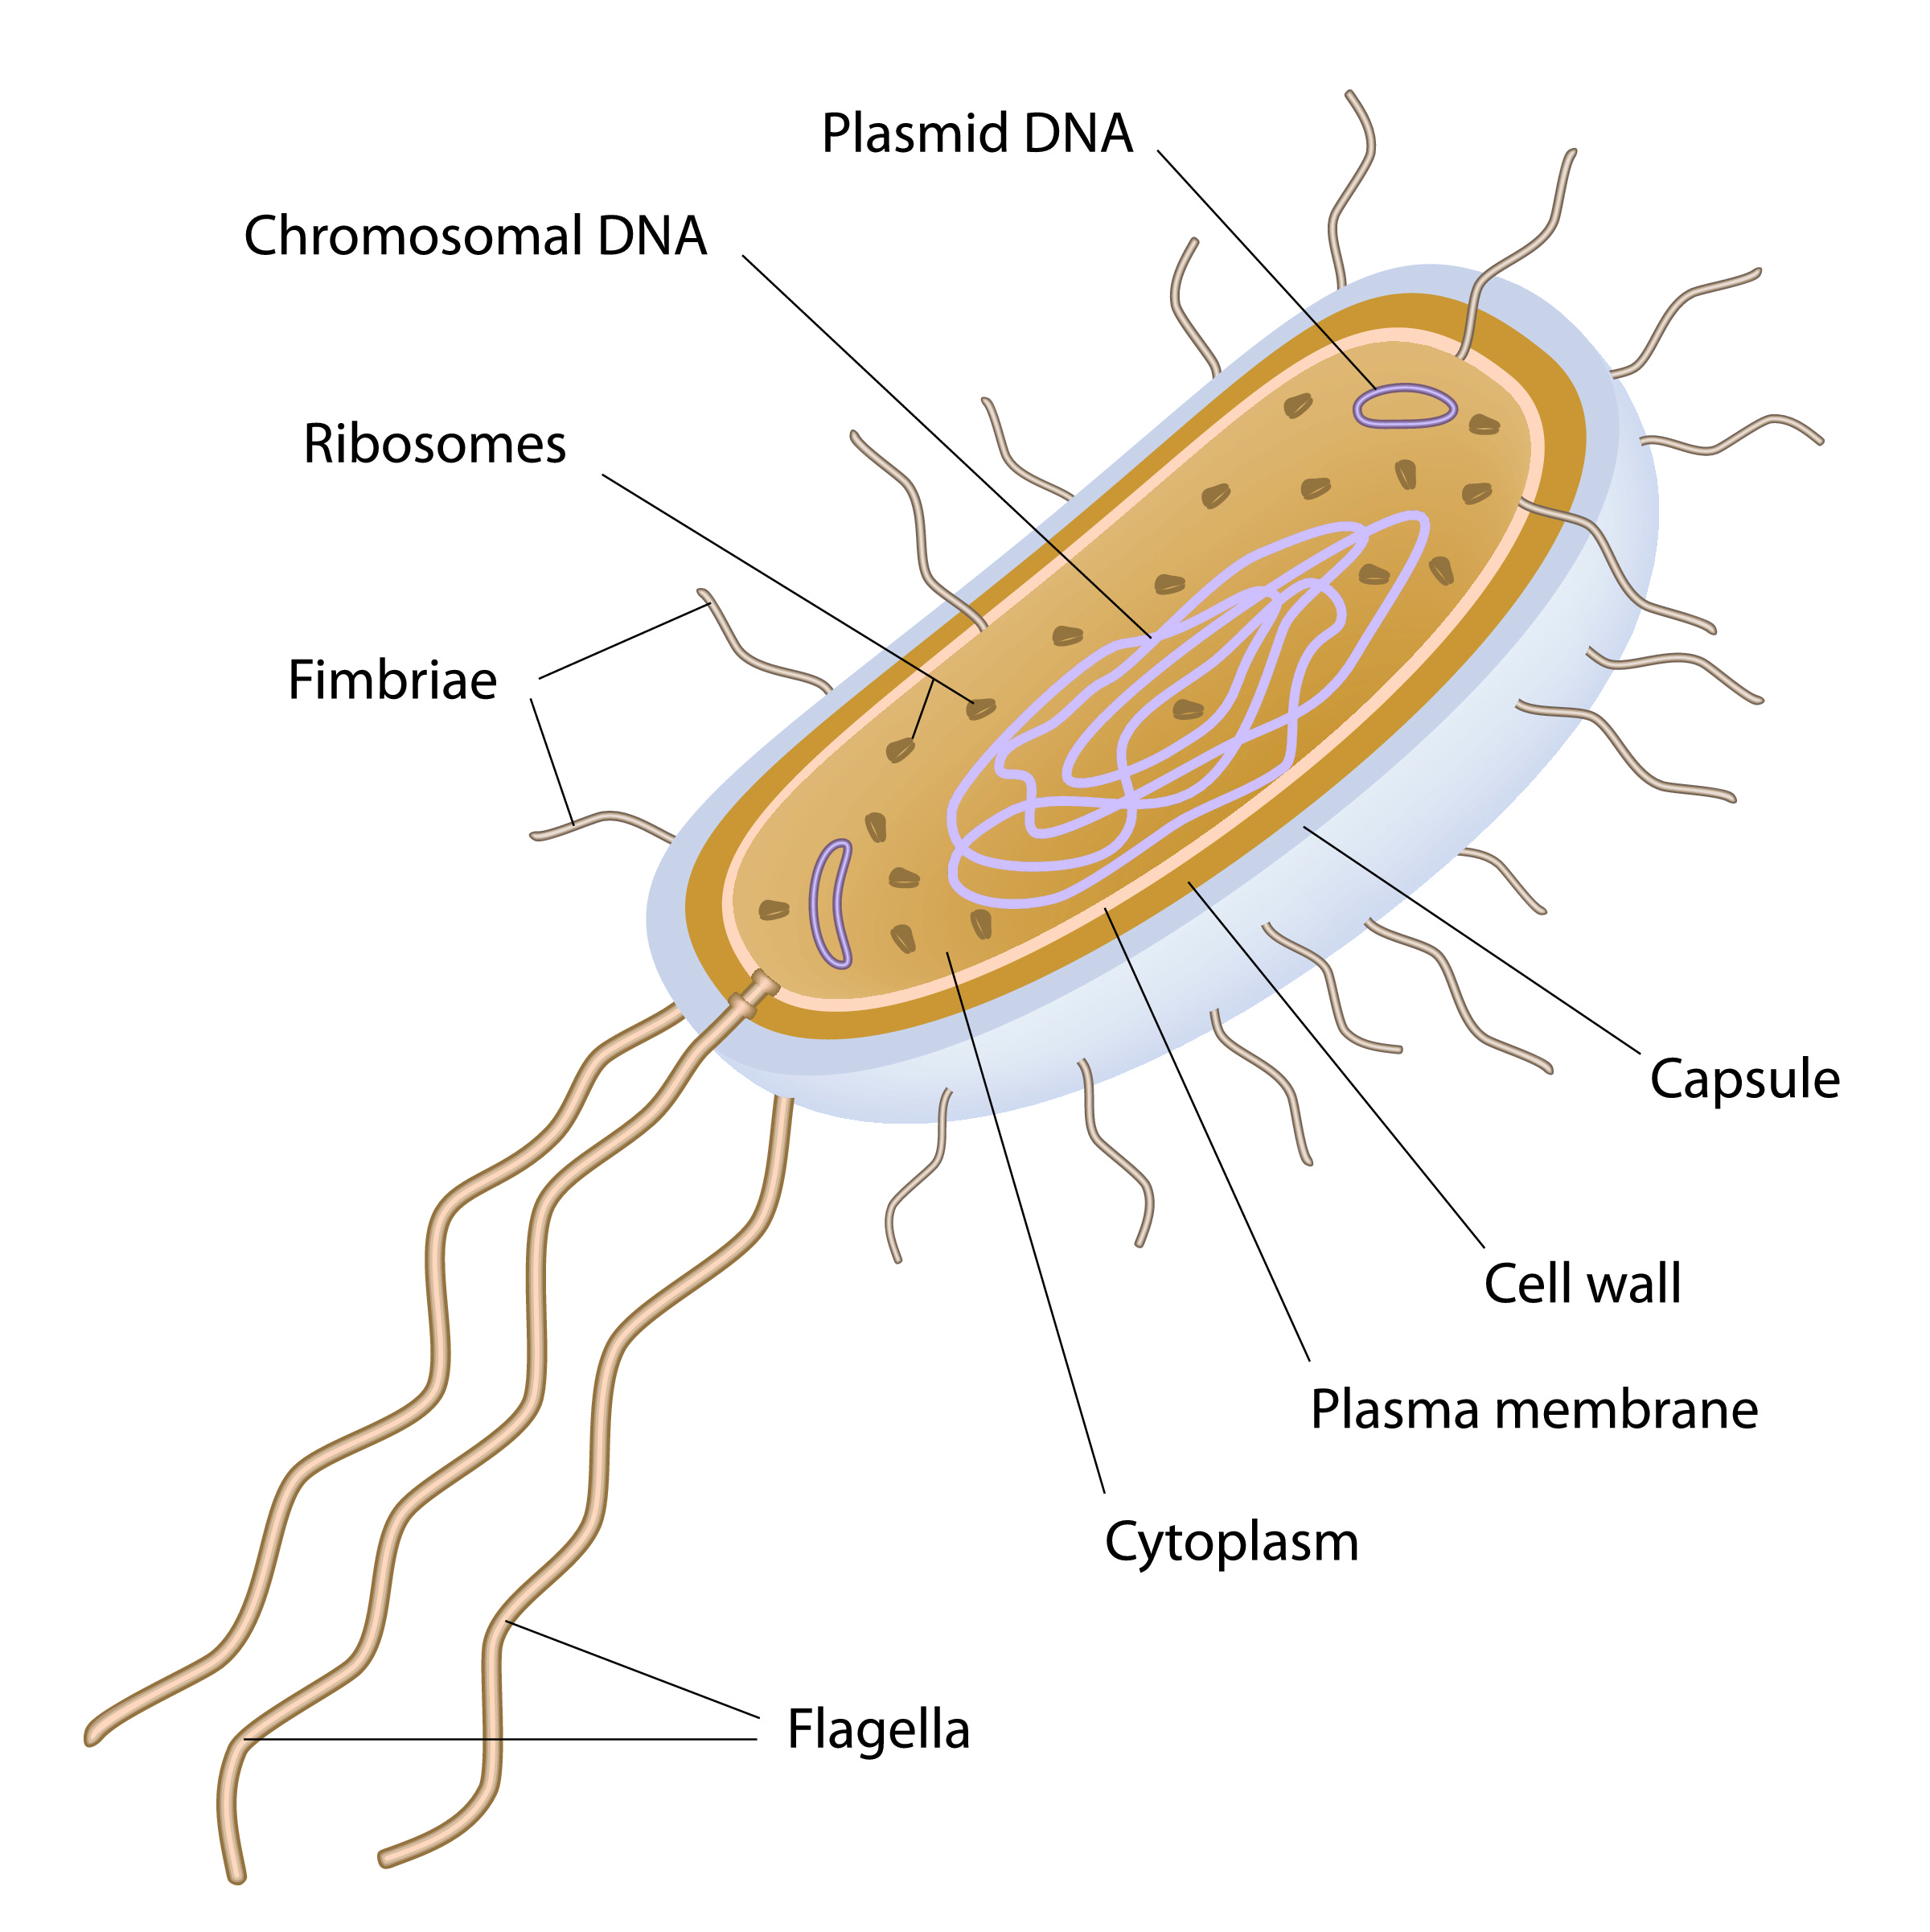 Image of a prokaryotic cell